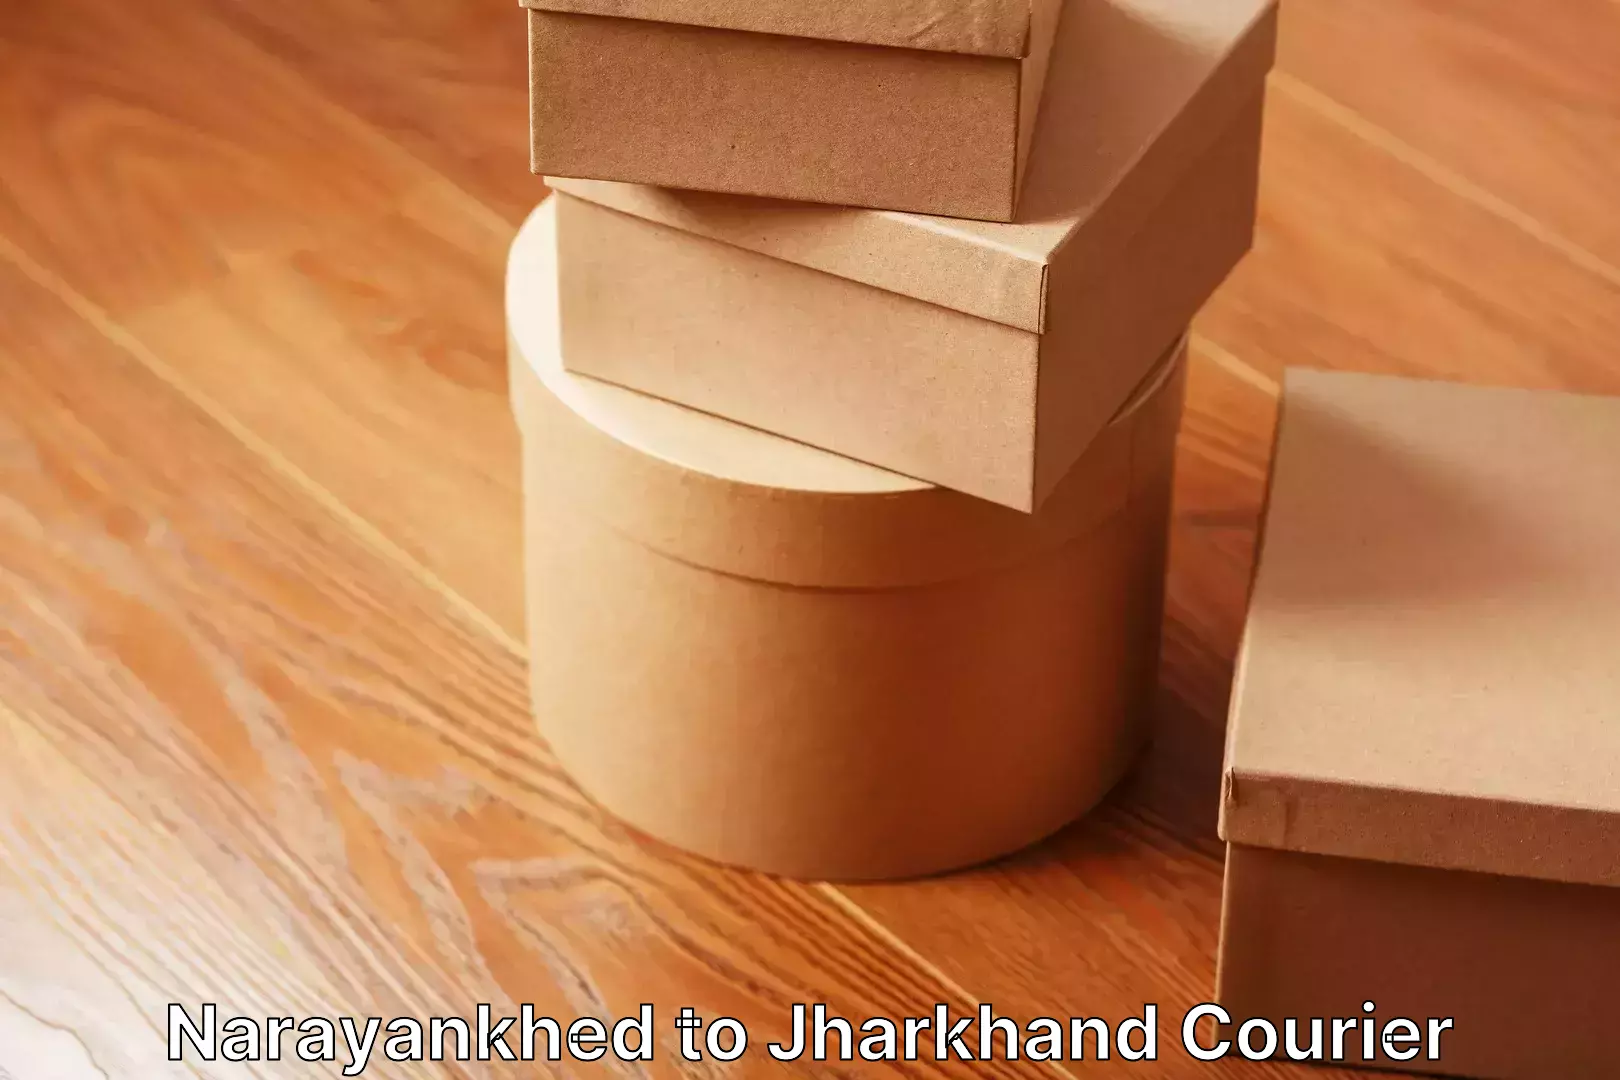 Furniture transport specialists Narayankhed to Jharkhand